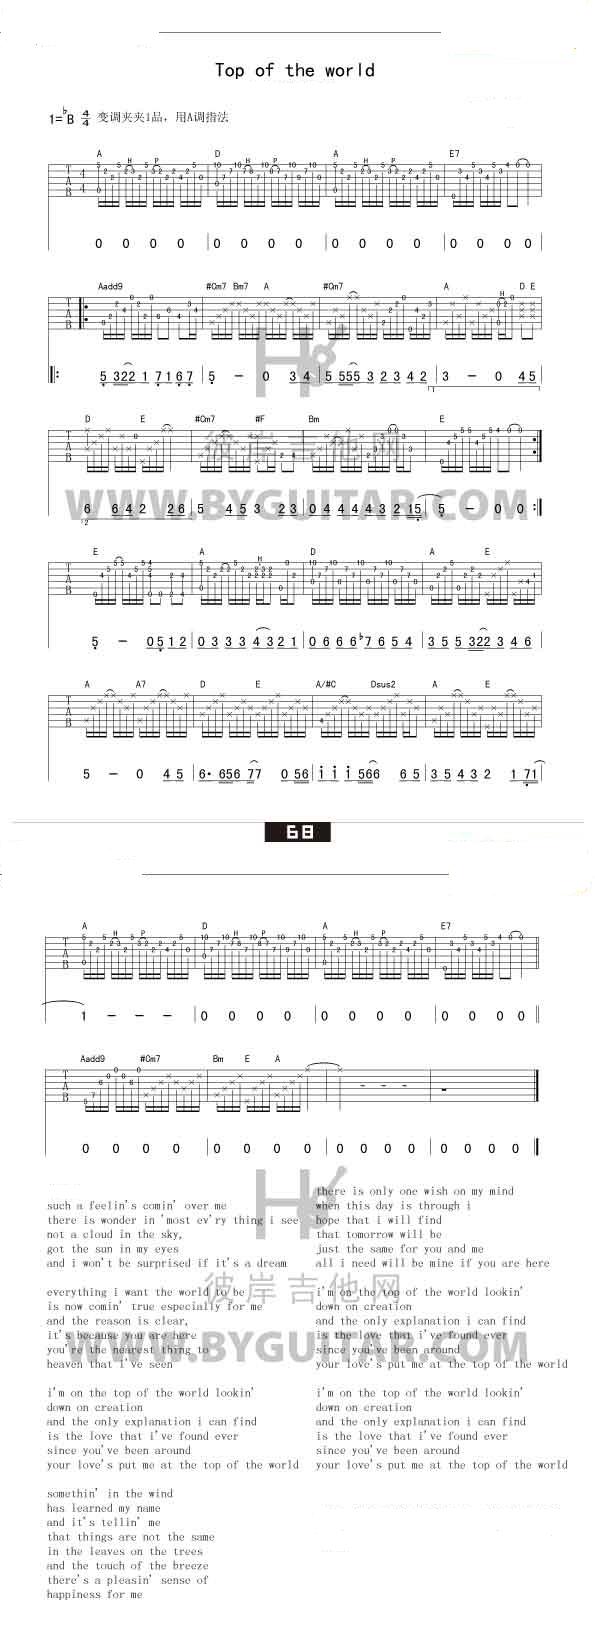 Top Of The World by Carpenters Guitar Sheet Music Free